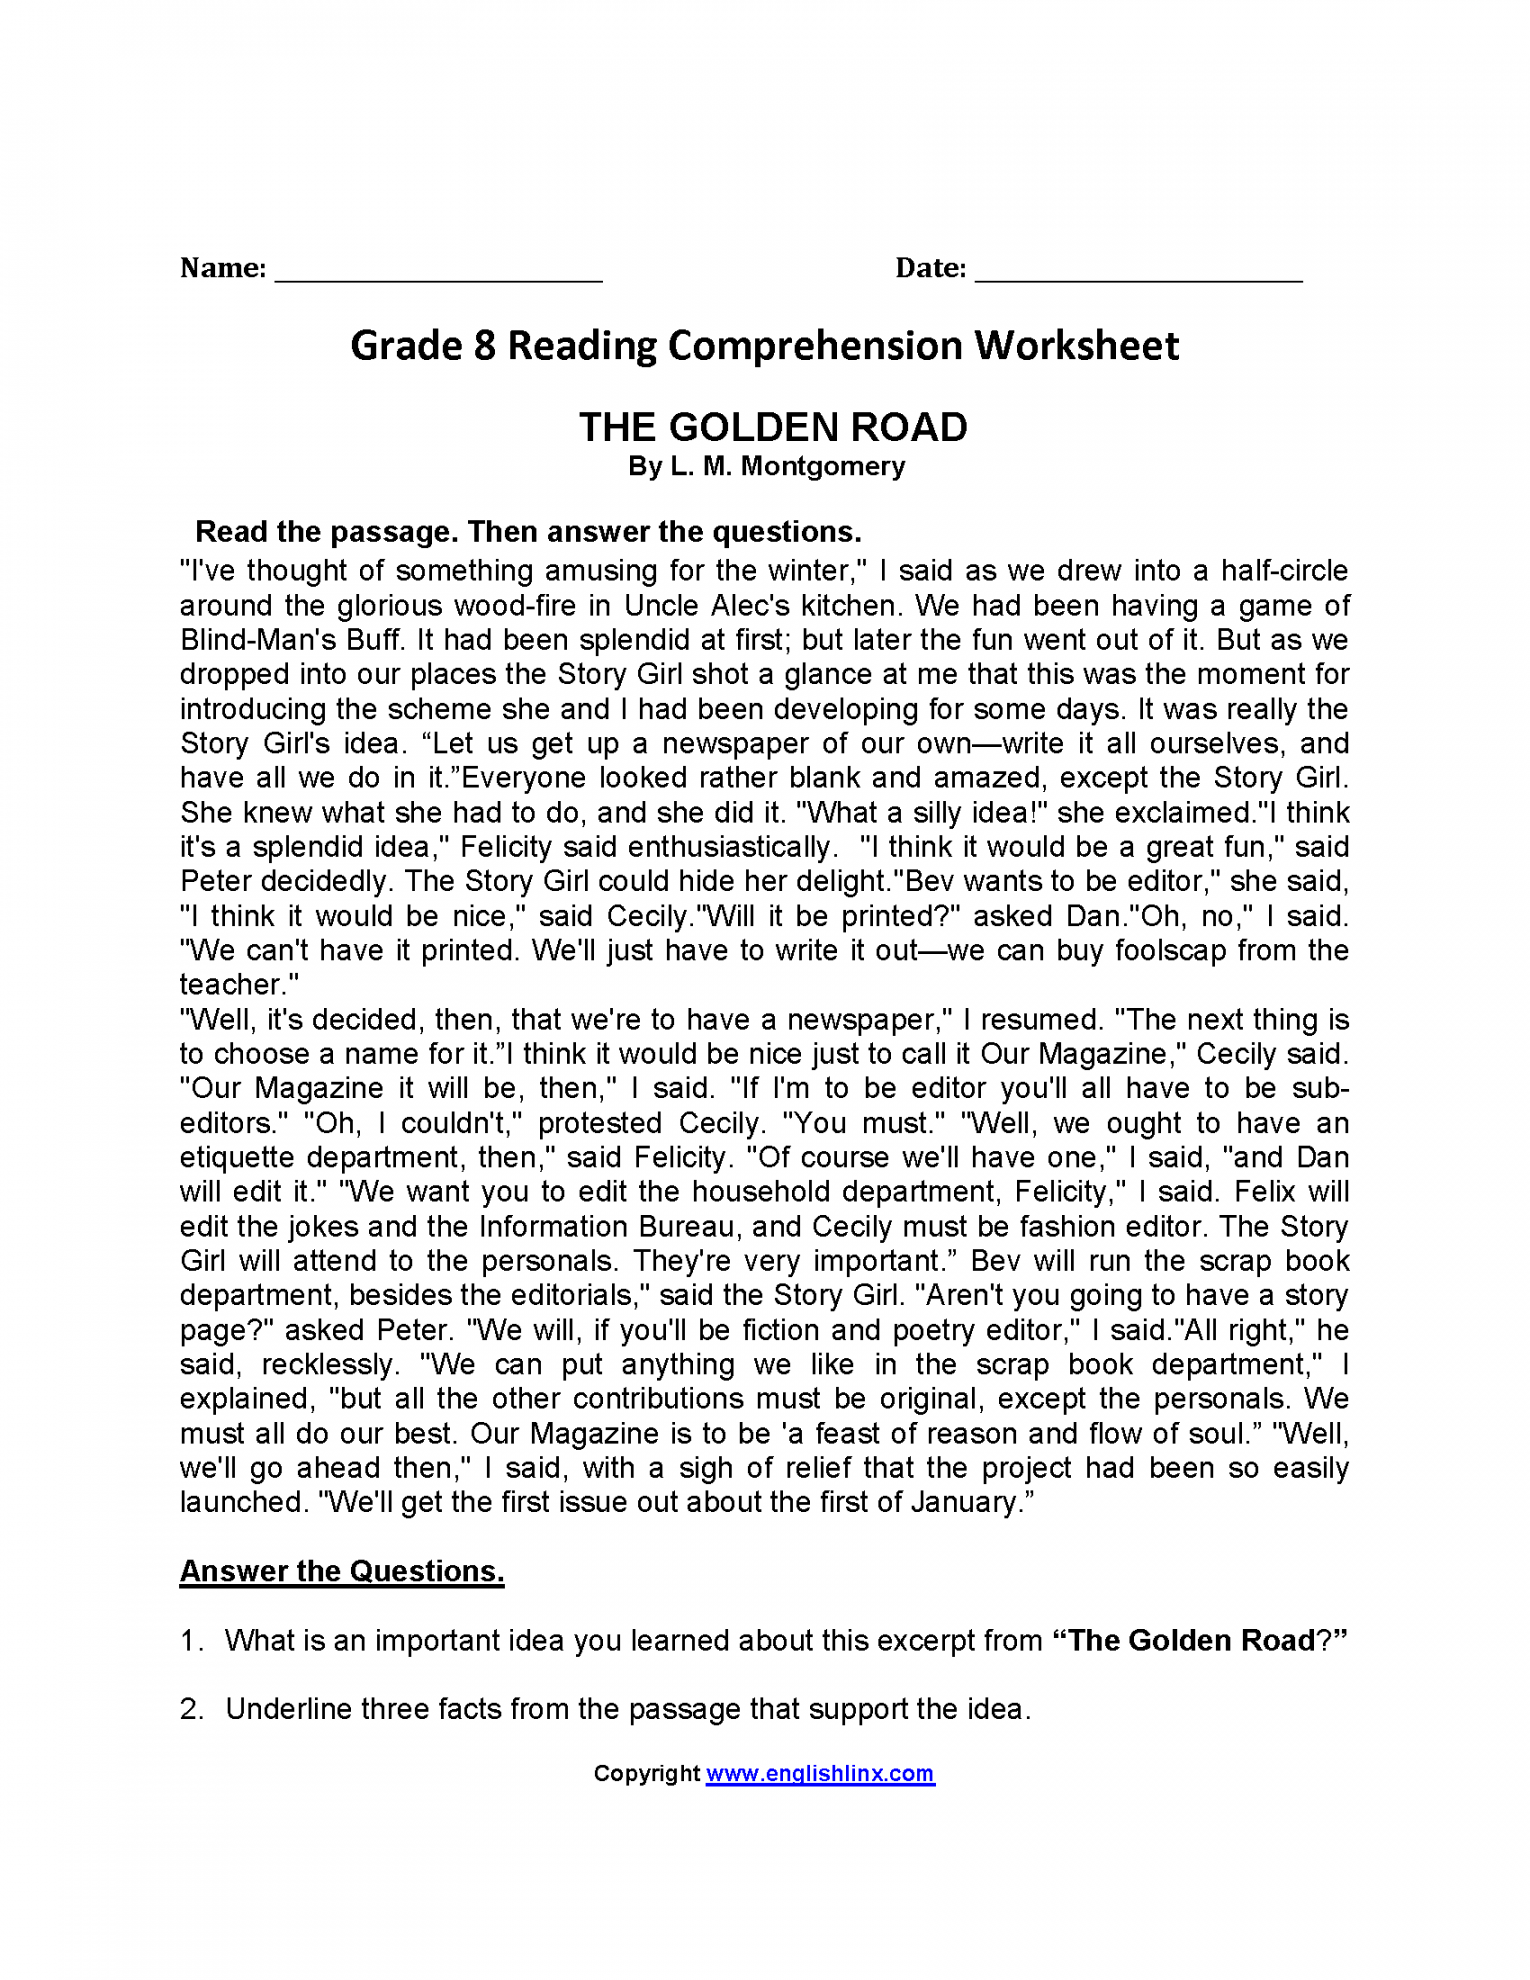 The Golden Road Eighth Grade Reading Worksheets  Comprehension